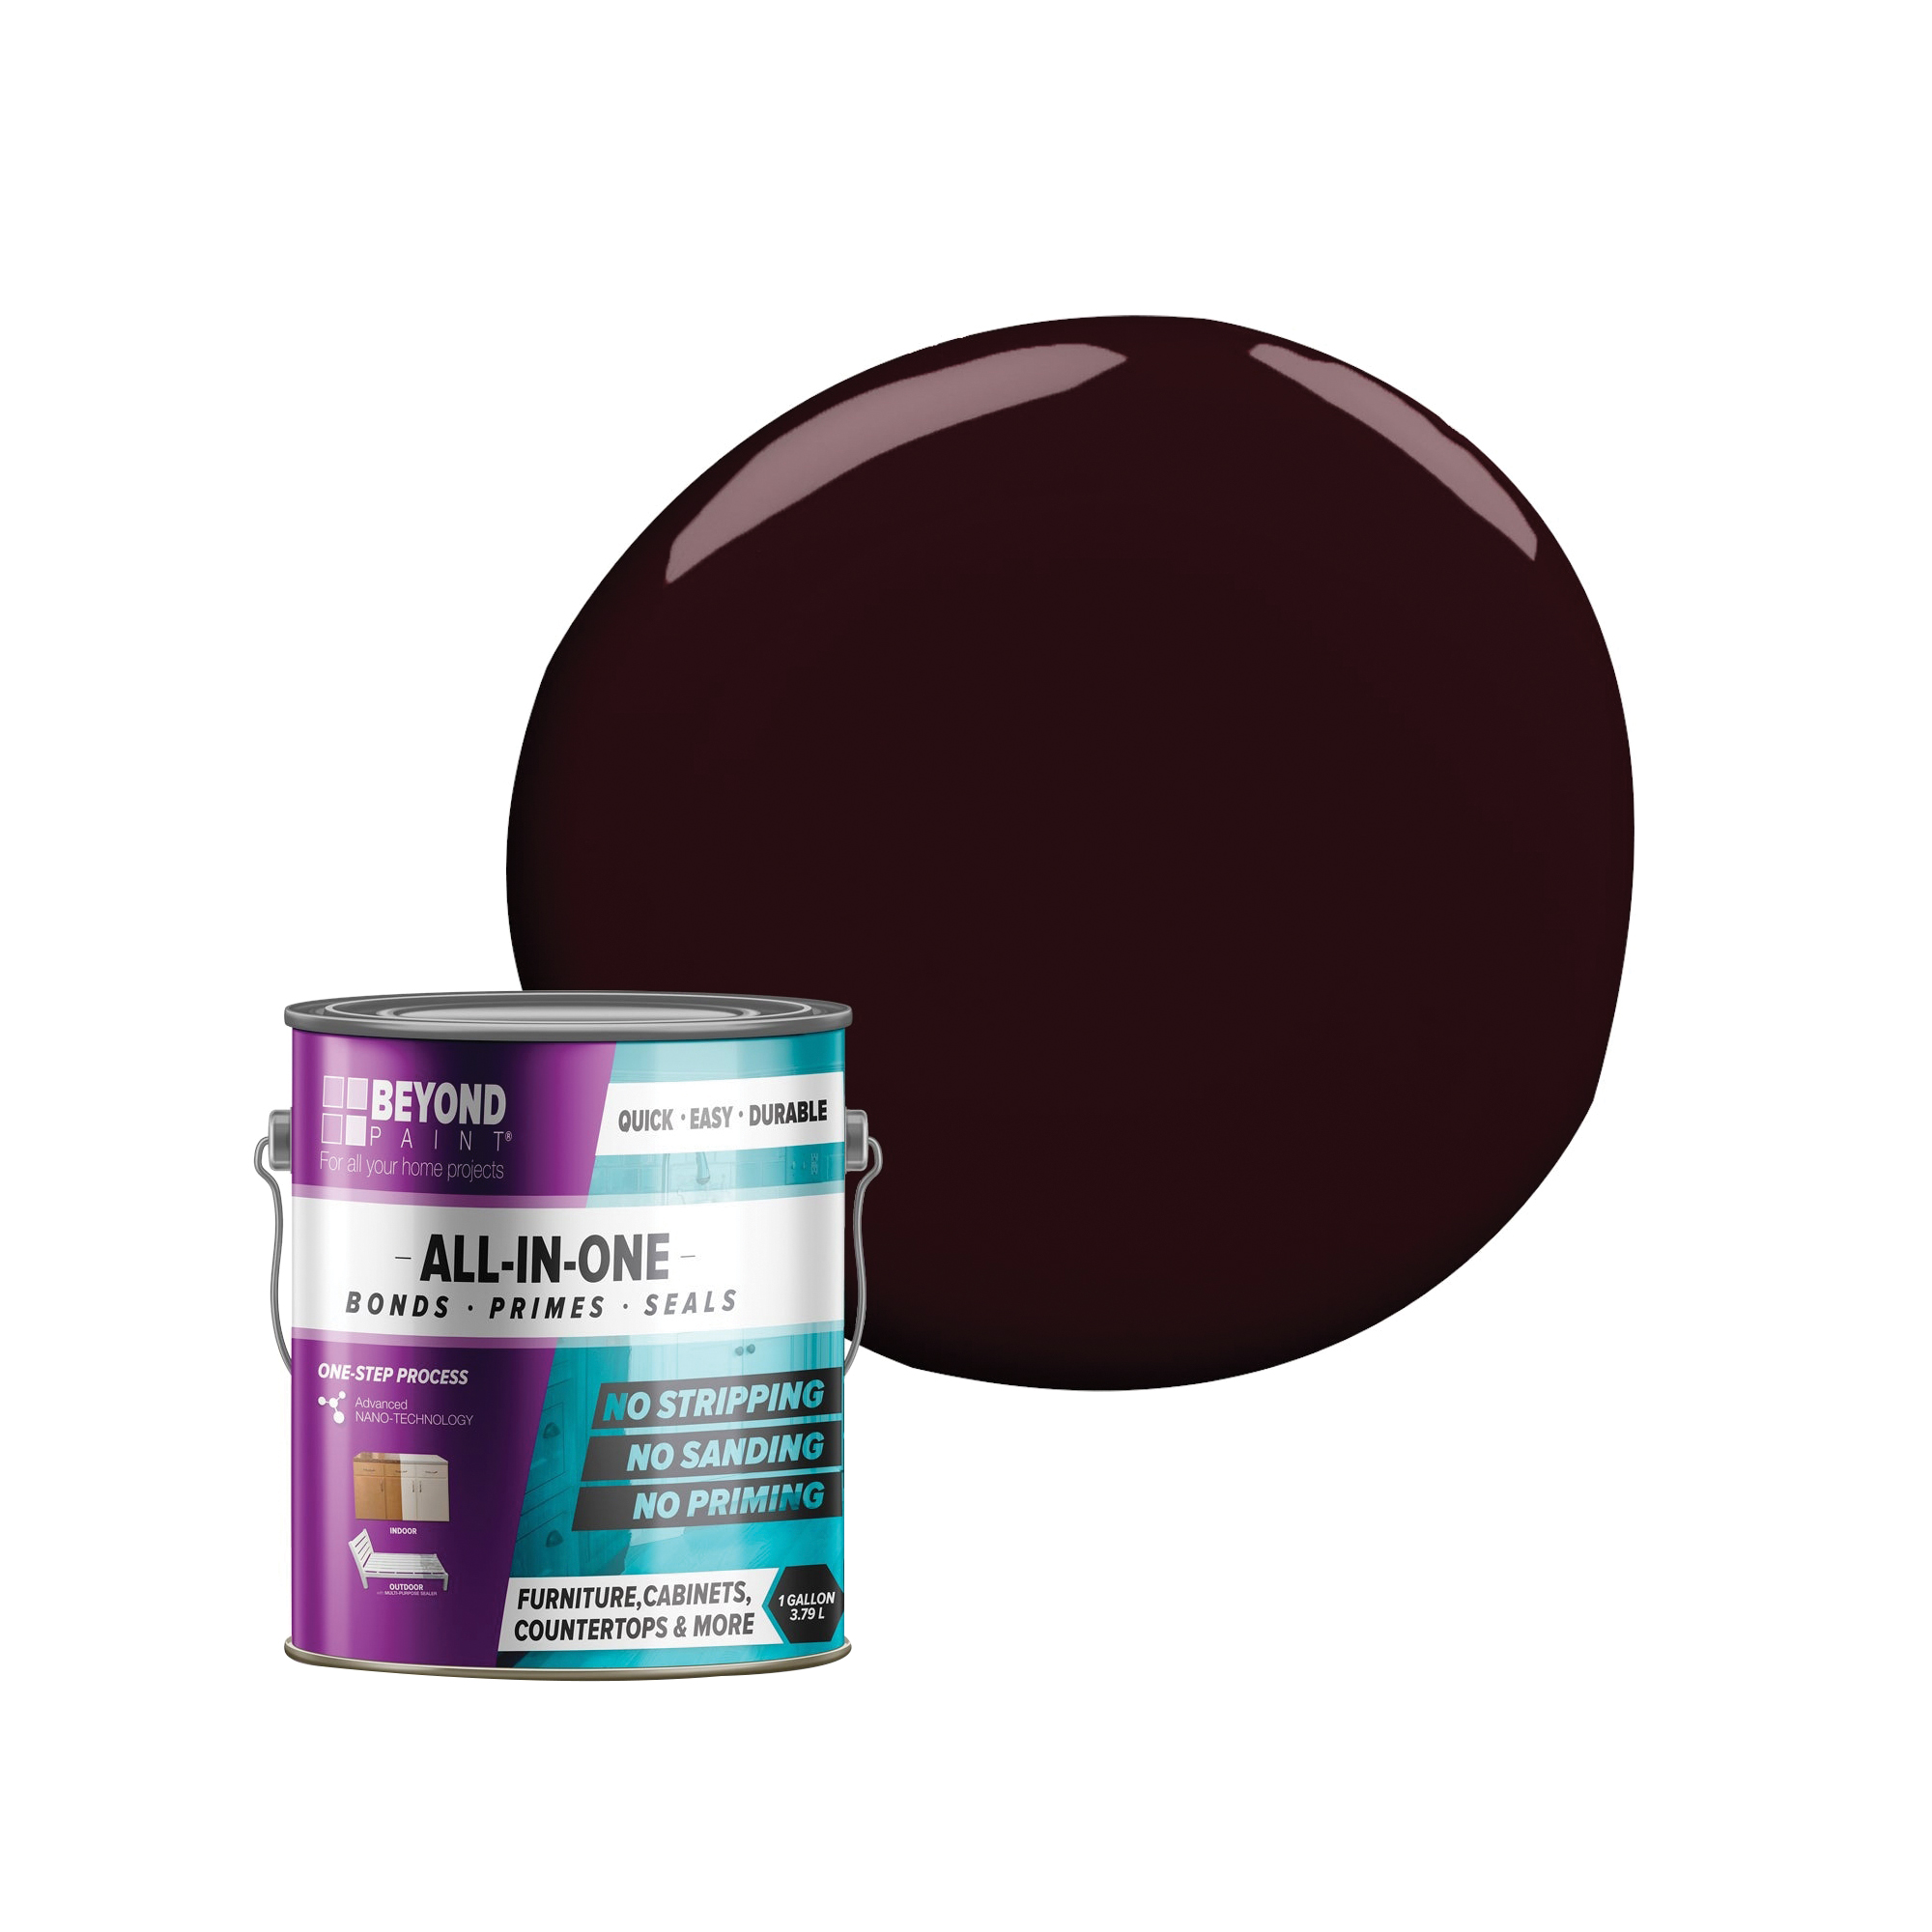 BEYOND PAINT All-In-One Series BP16 Craft Paint, Flat, Mocha, 1 gal